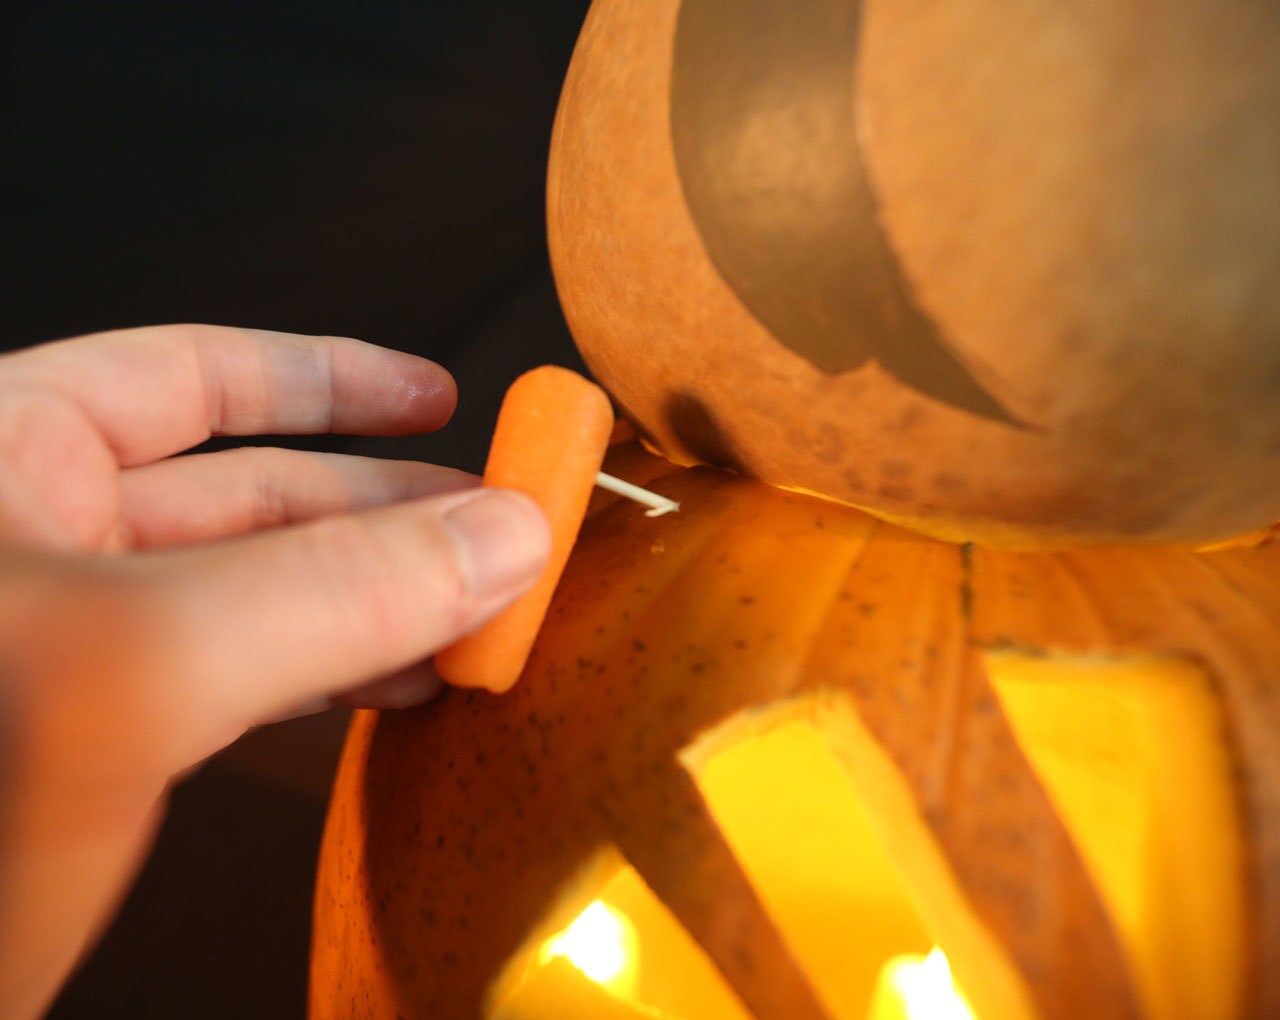 Using baby toothpicks, a person places carrots between the Chewbacca pumpkin on the bottom and the porg gourd on top. The carrots will serve as the porgs feet.